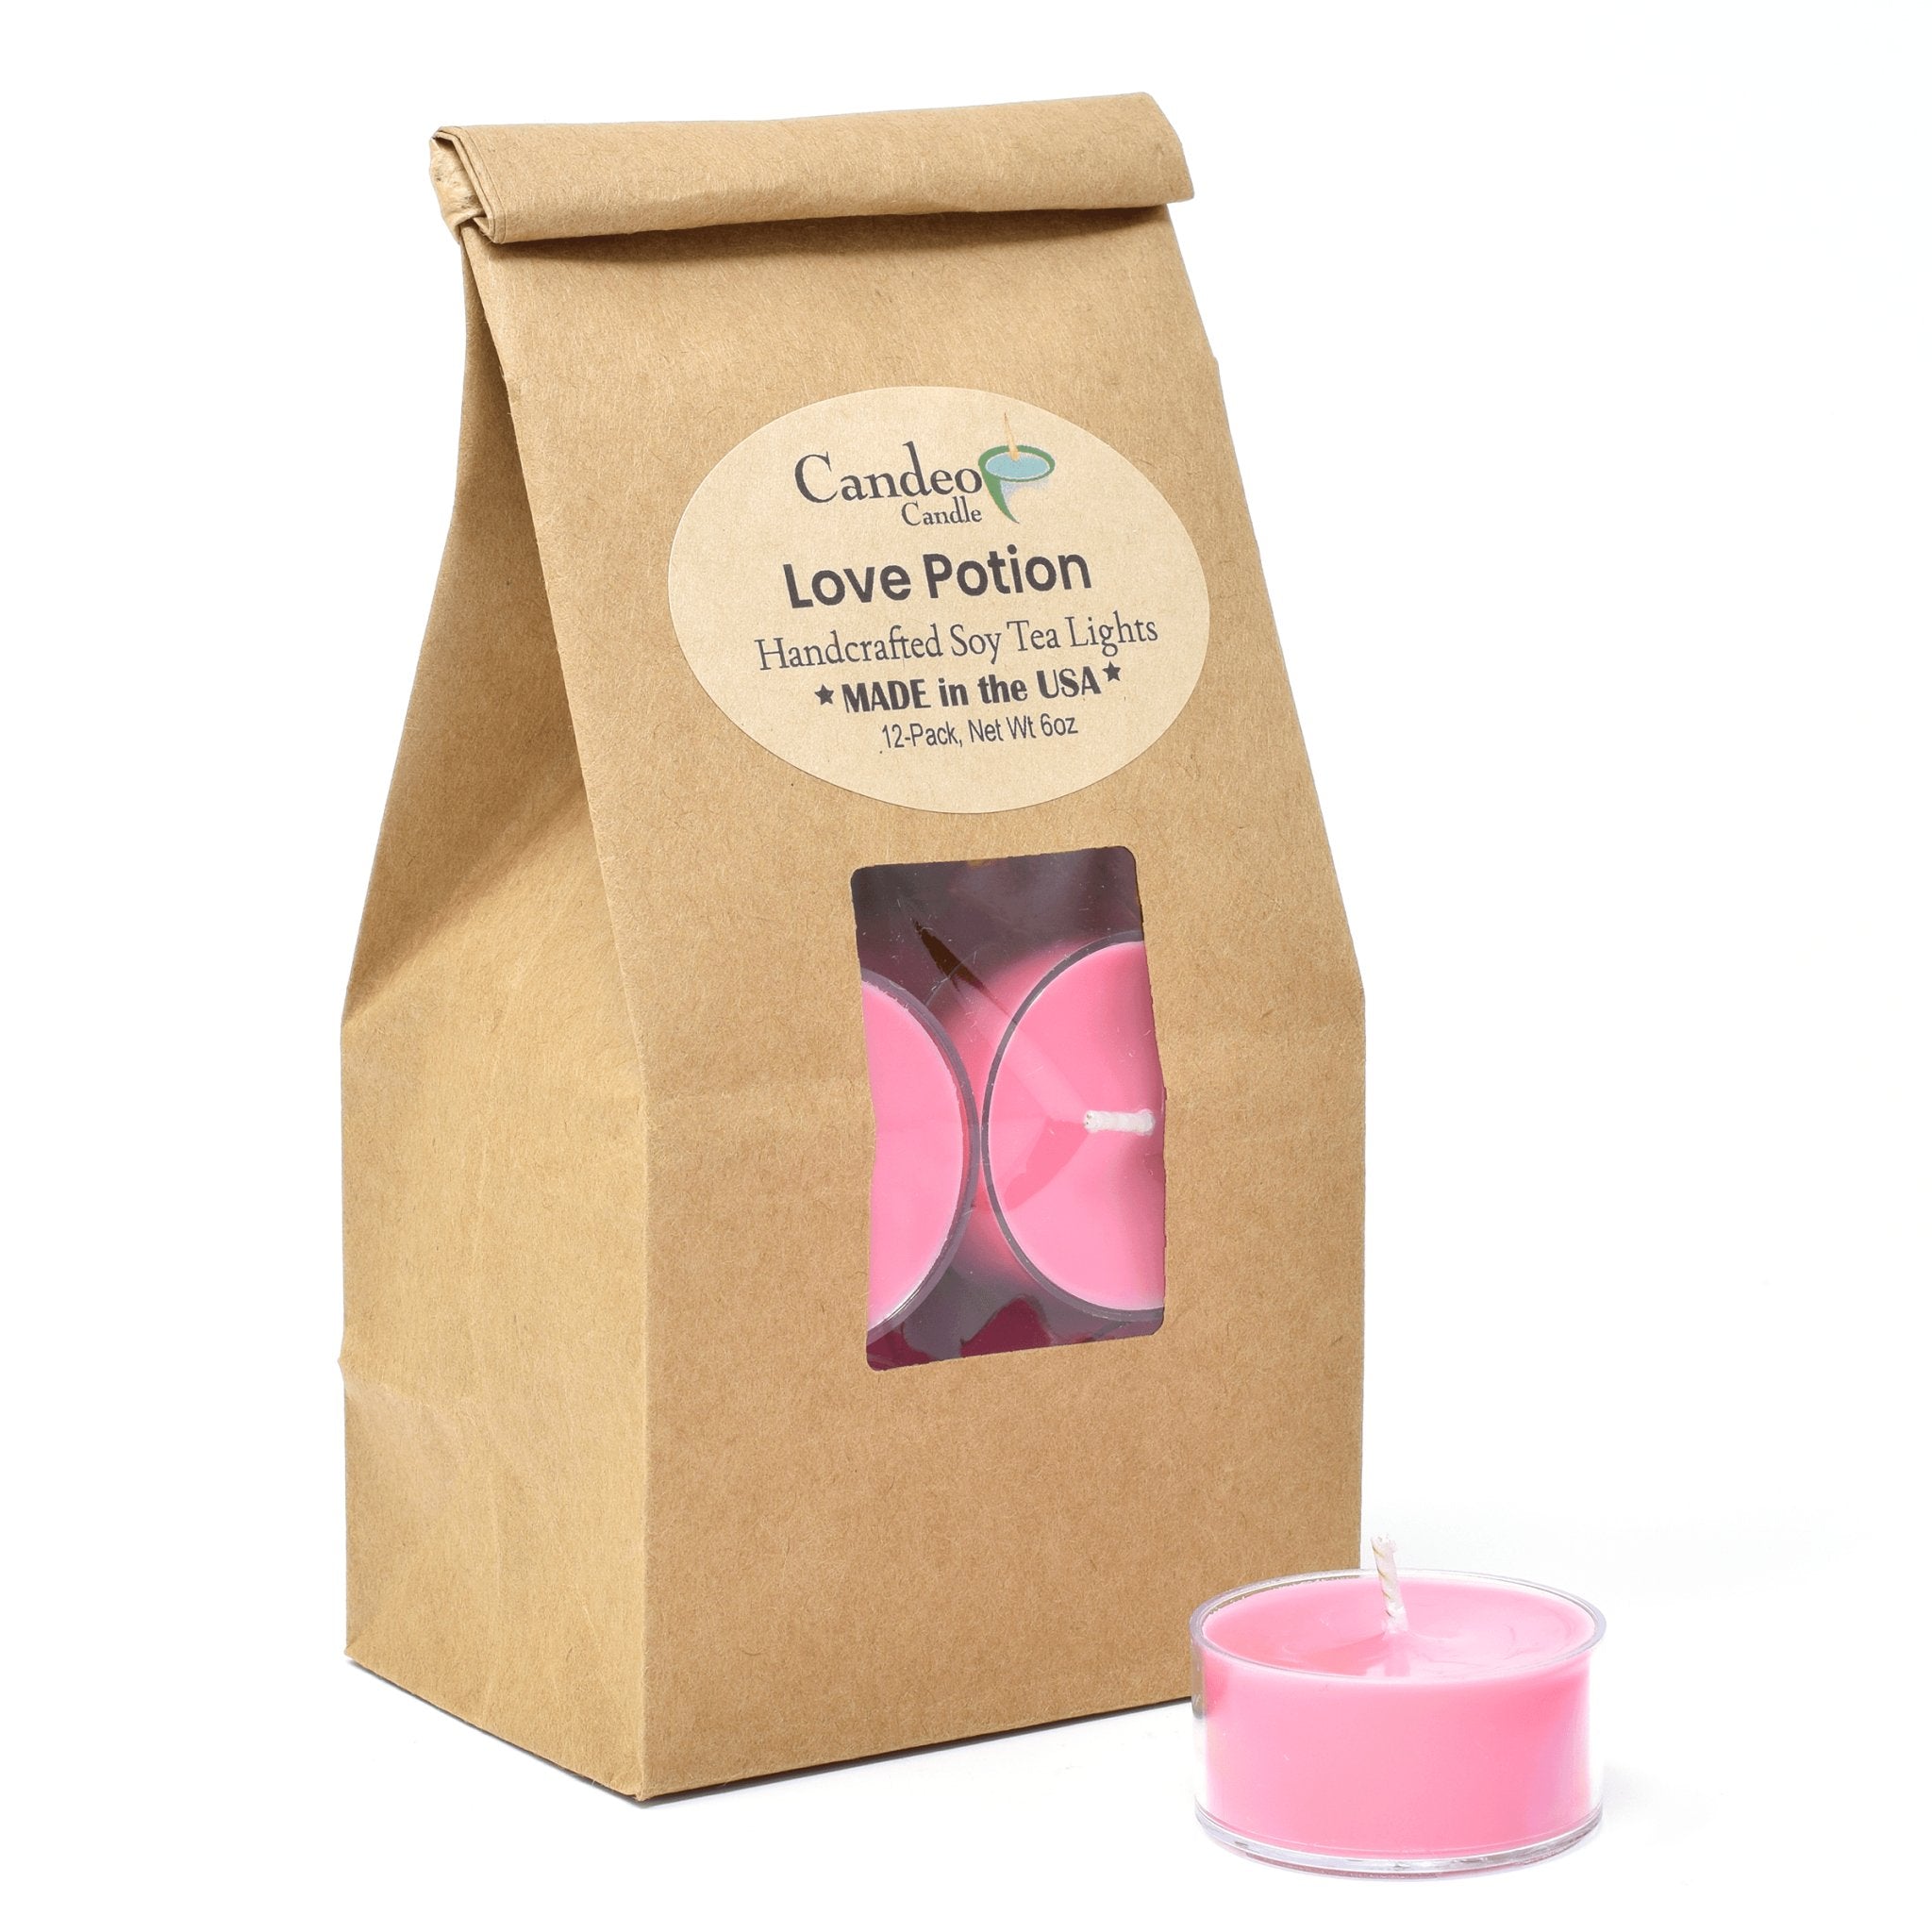 Love Potion, Soy Tea Light 12-Pack - Candeo Candle